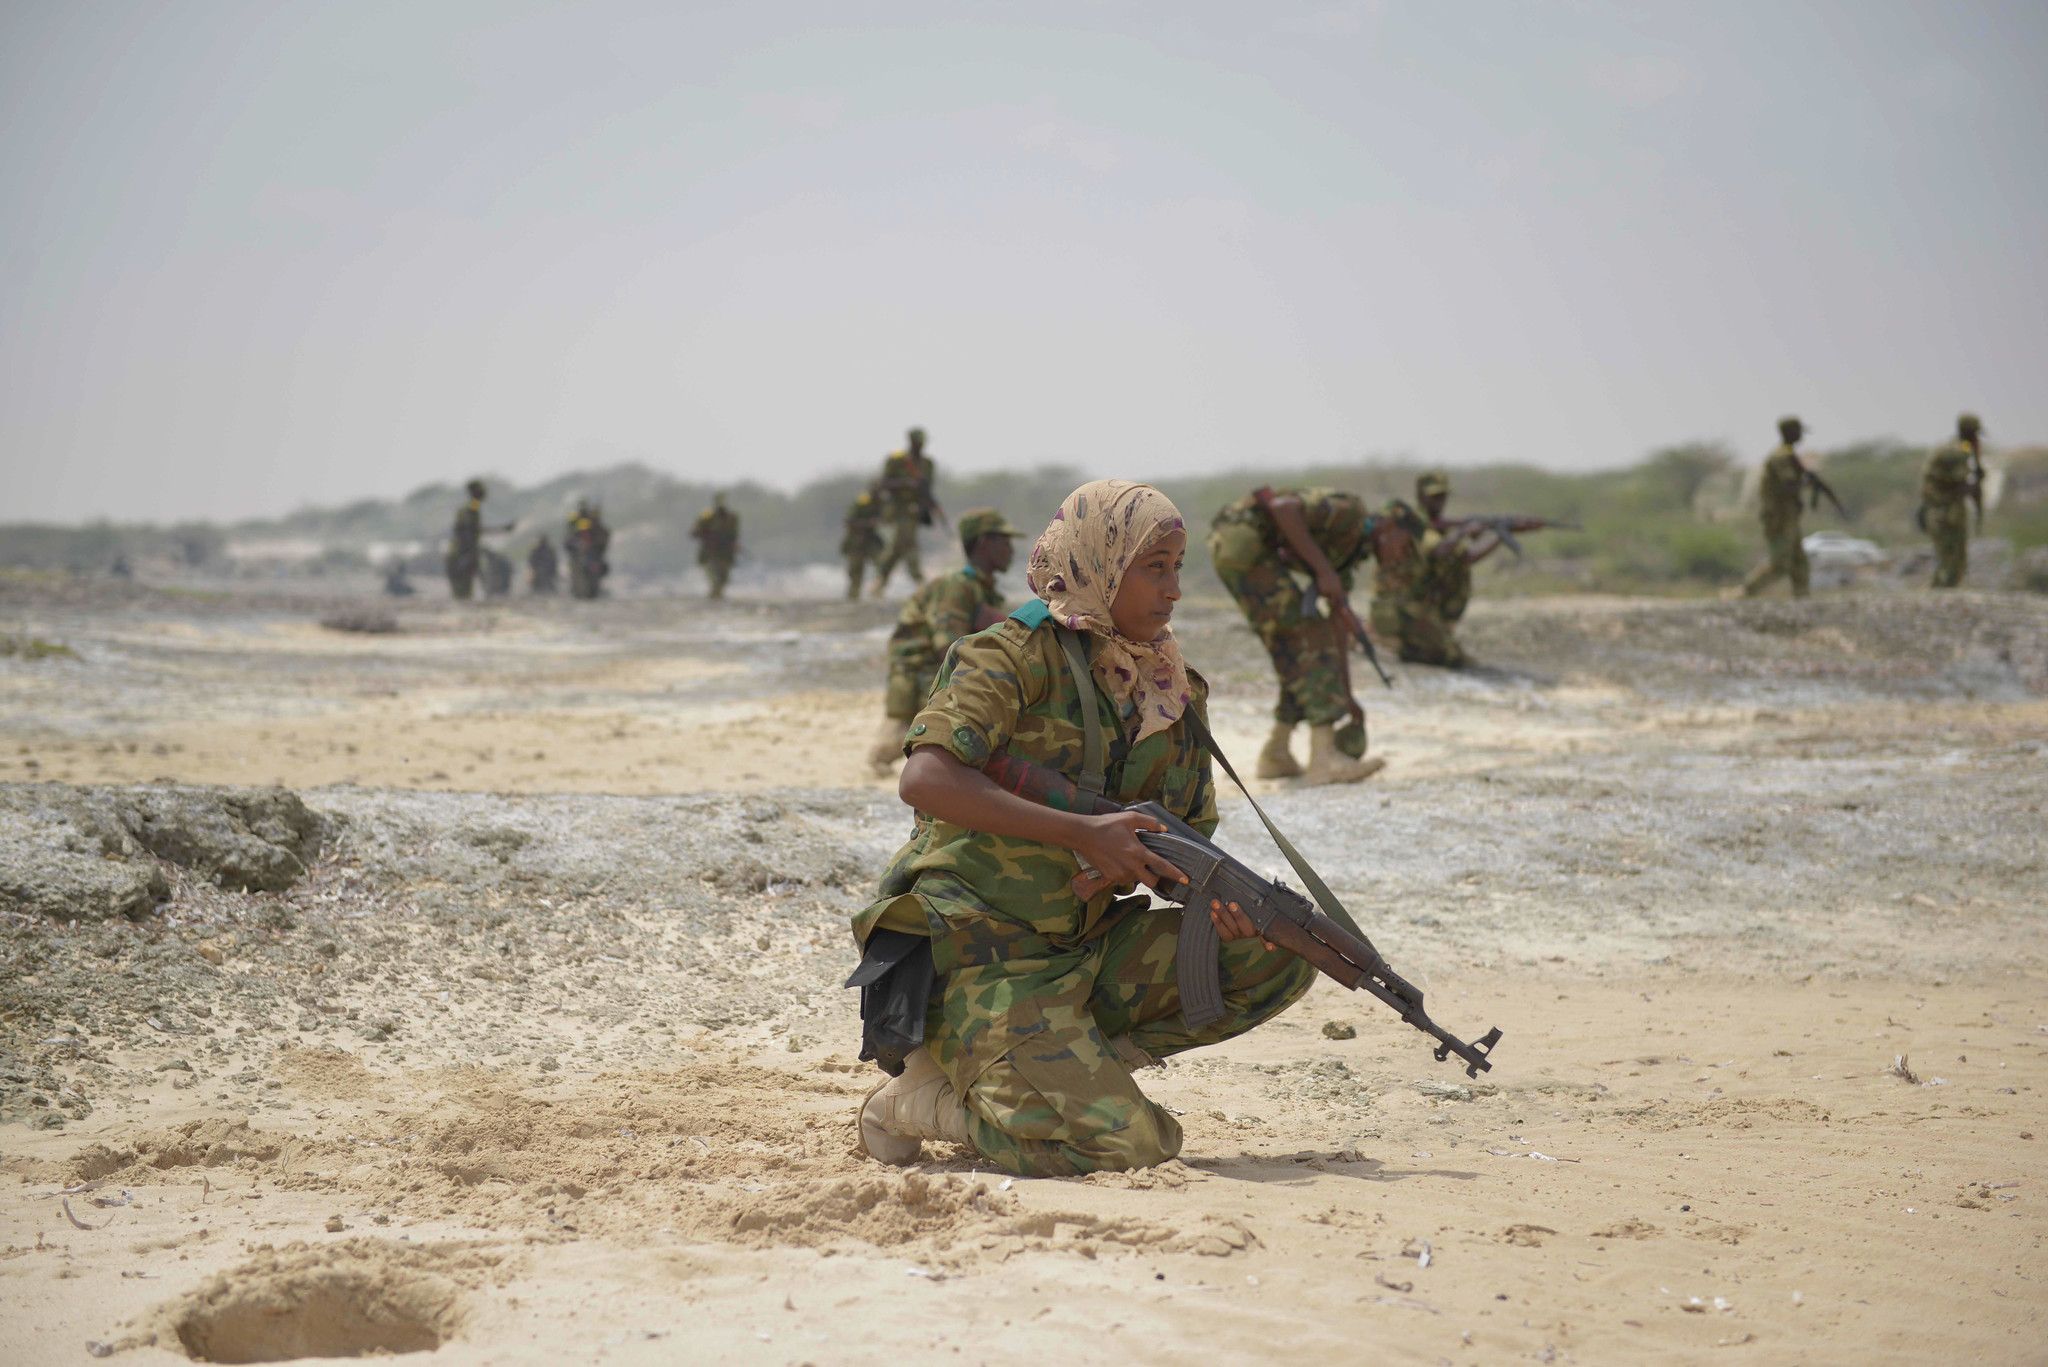 A female soldier belonging to the Somali National Army.